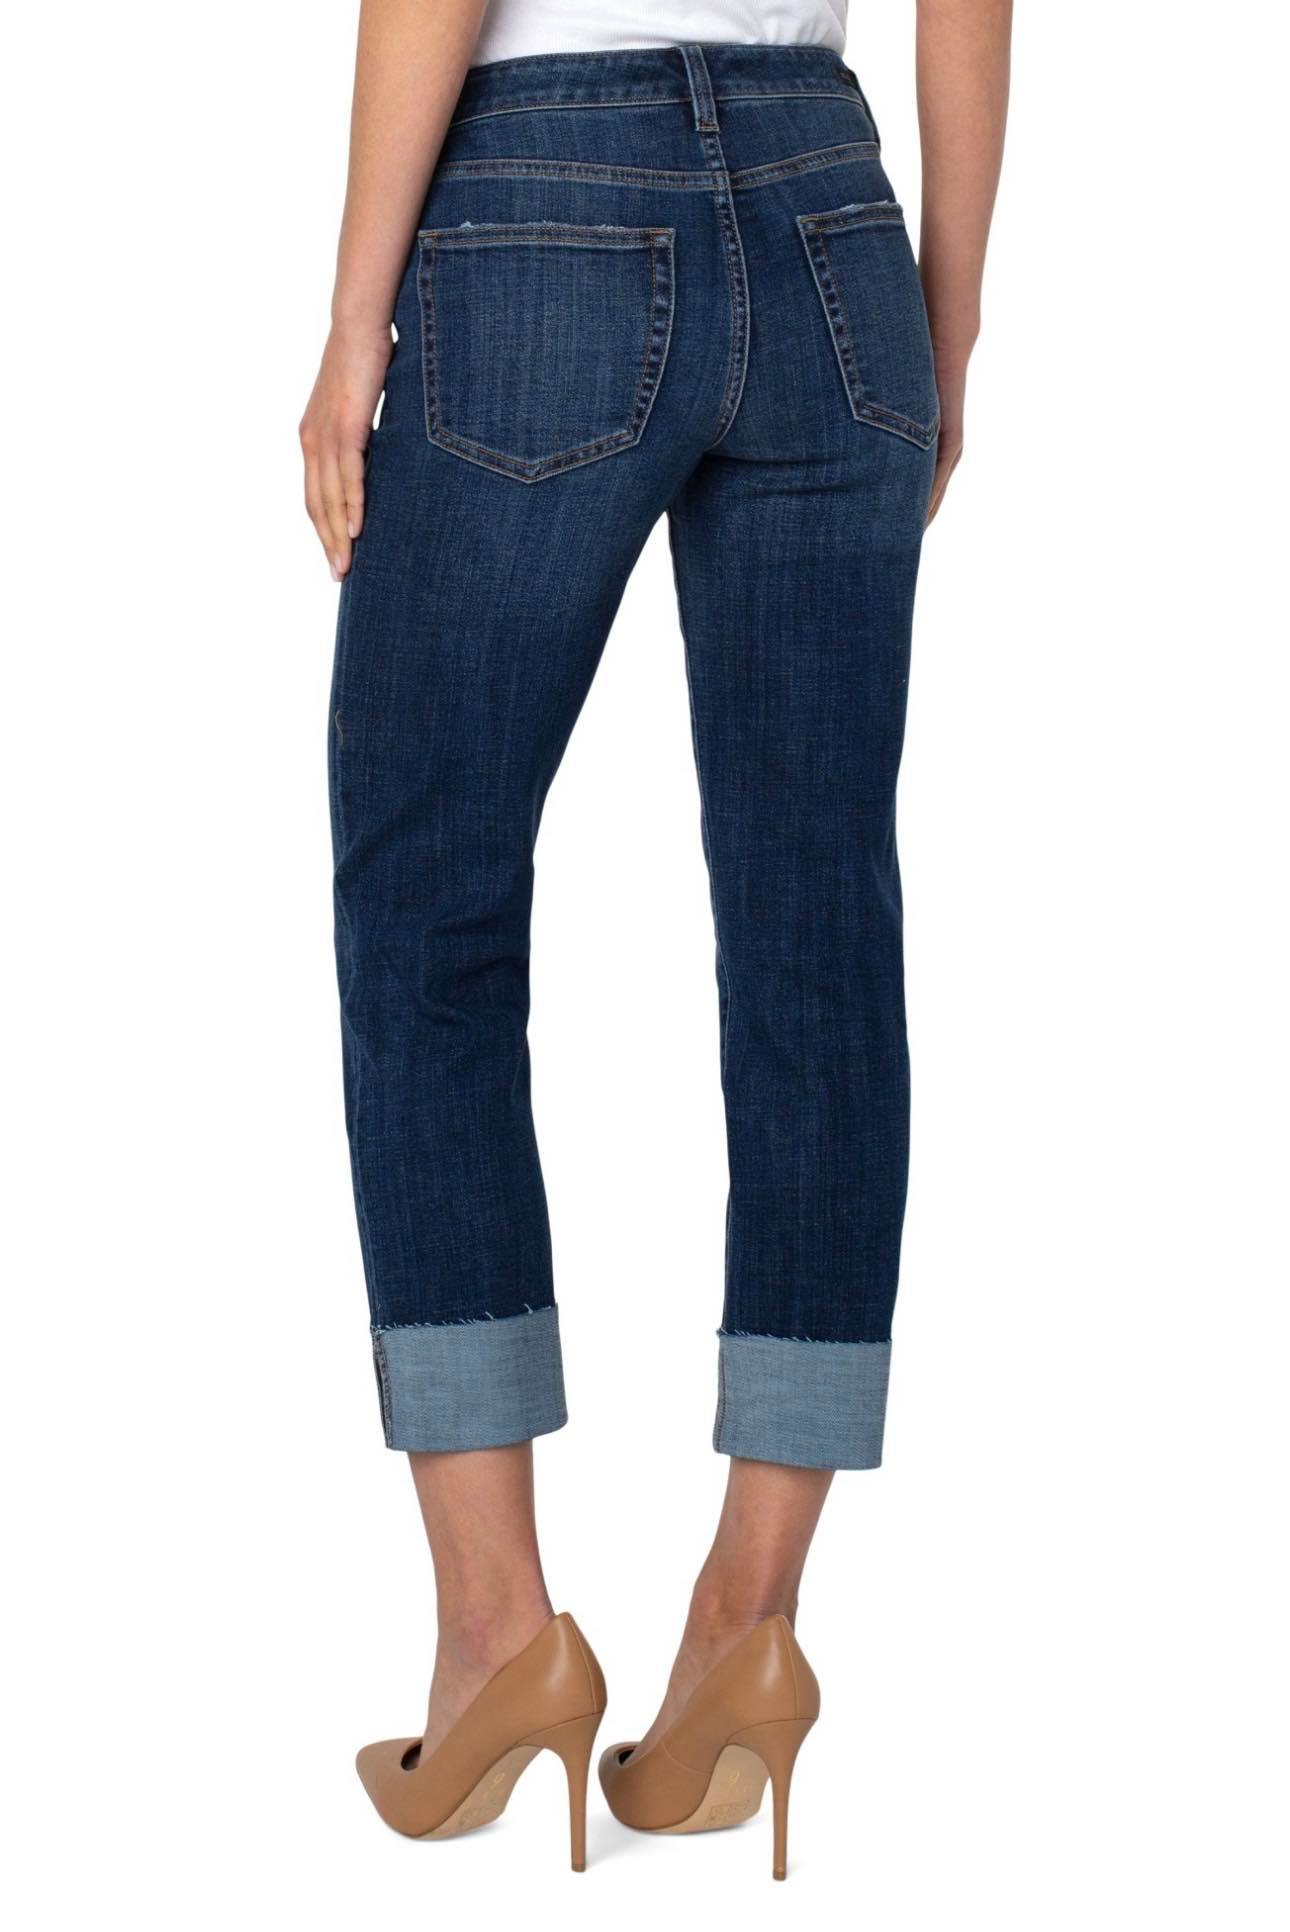 Liverpool Marley Girlfriend With Raw Cut Cuff Jeans